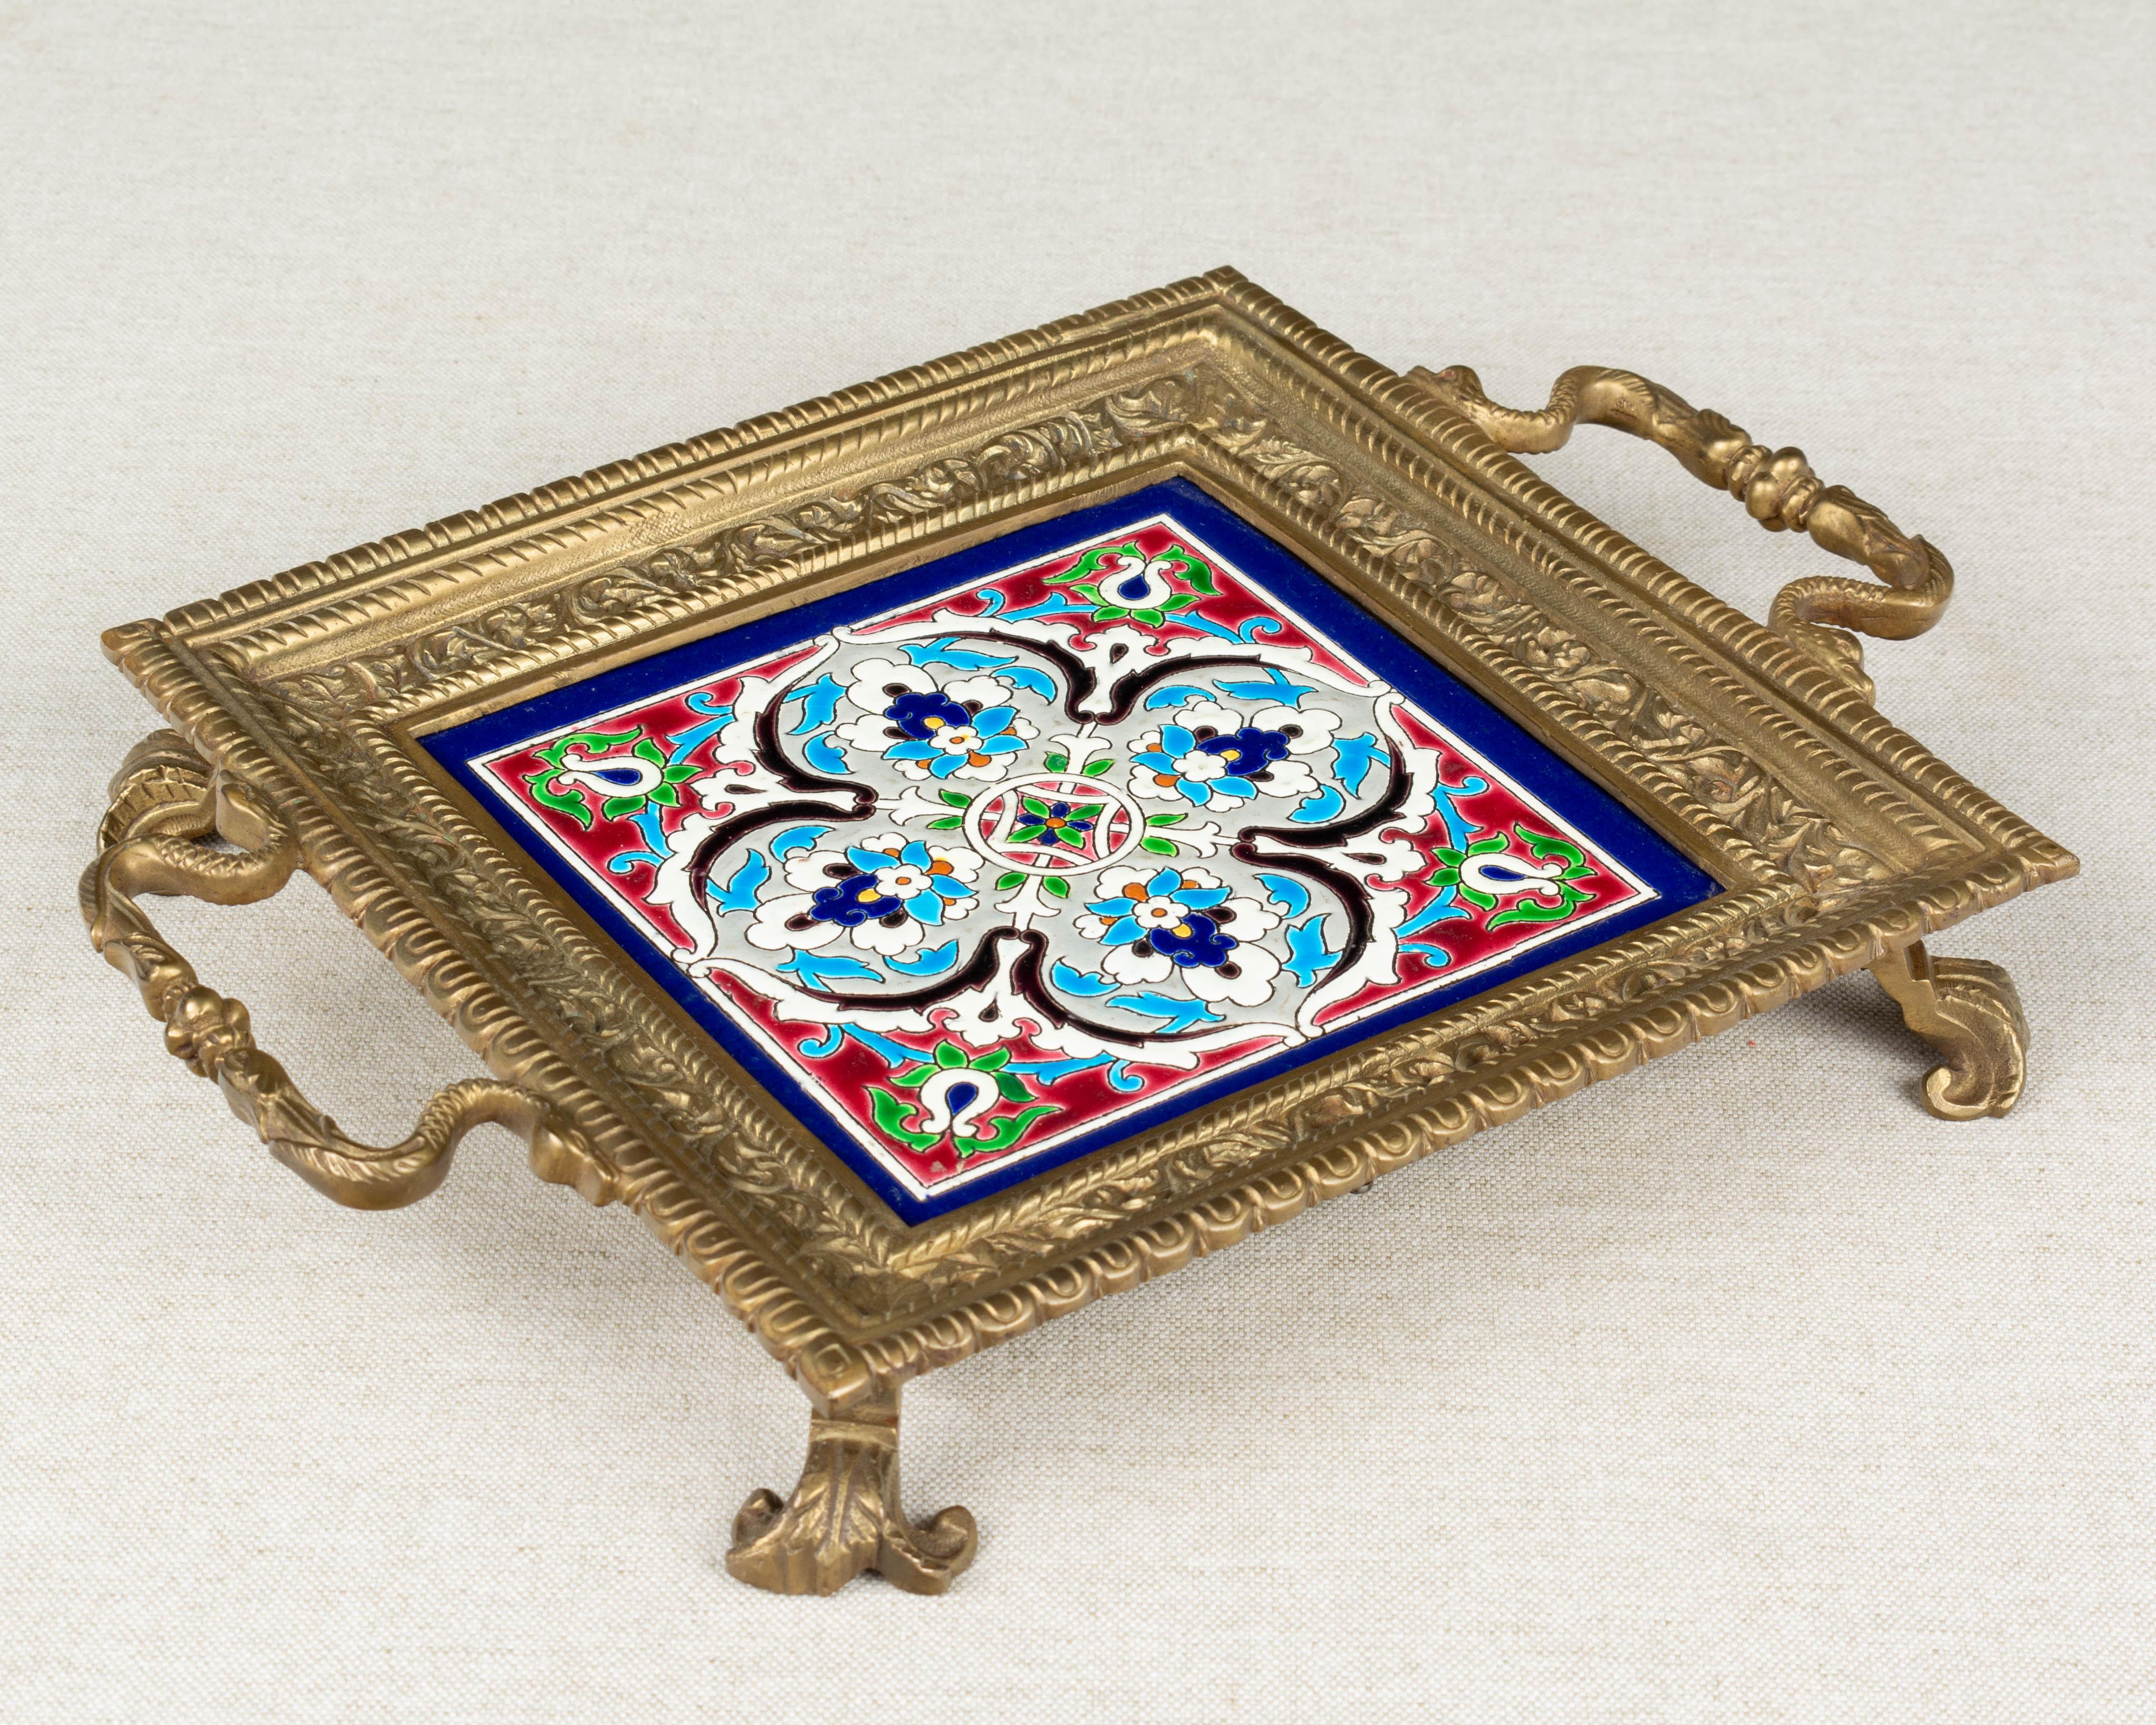 A French bronze trivet inset with a Longwy ceramic Persian style tile at the center. Vibrant hand painted cloisonné enamel in blue, red, green, yellow, orange and black on white and pale gray ground. Nicely detailed casting with handles at either